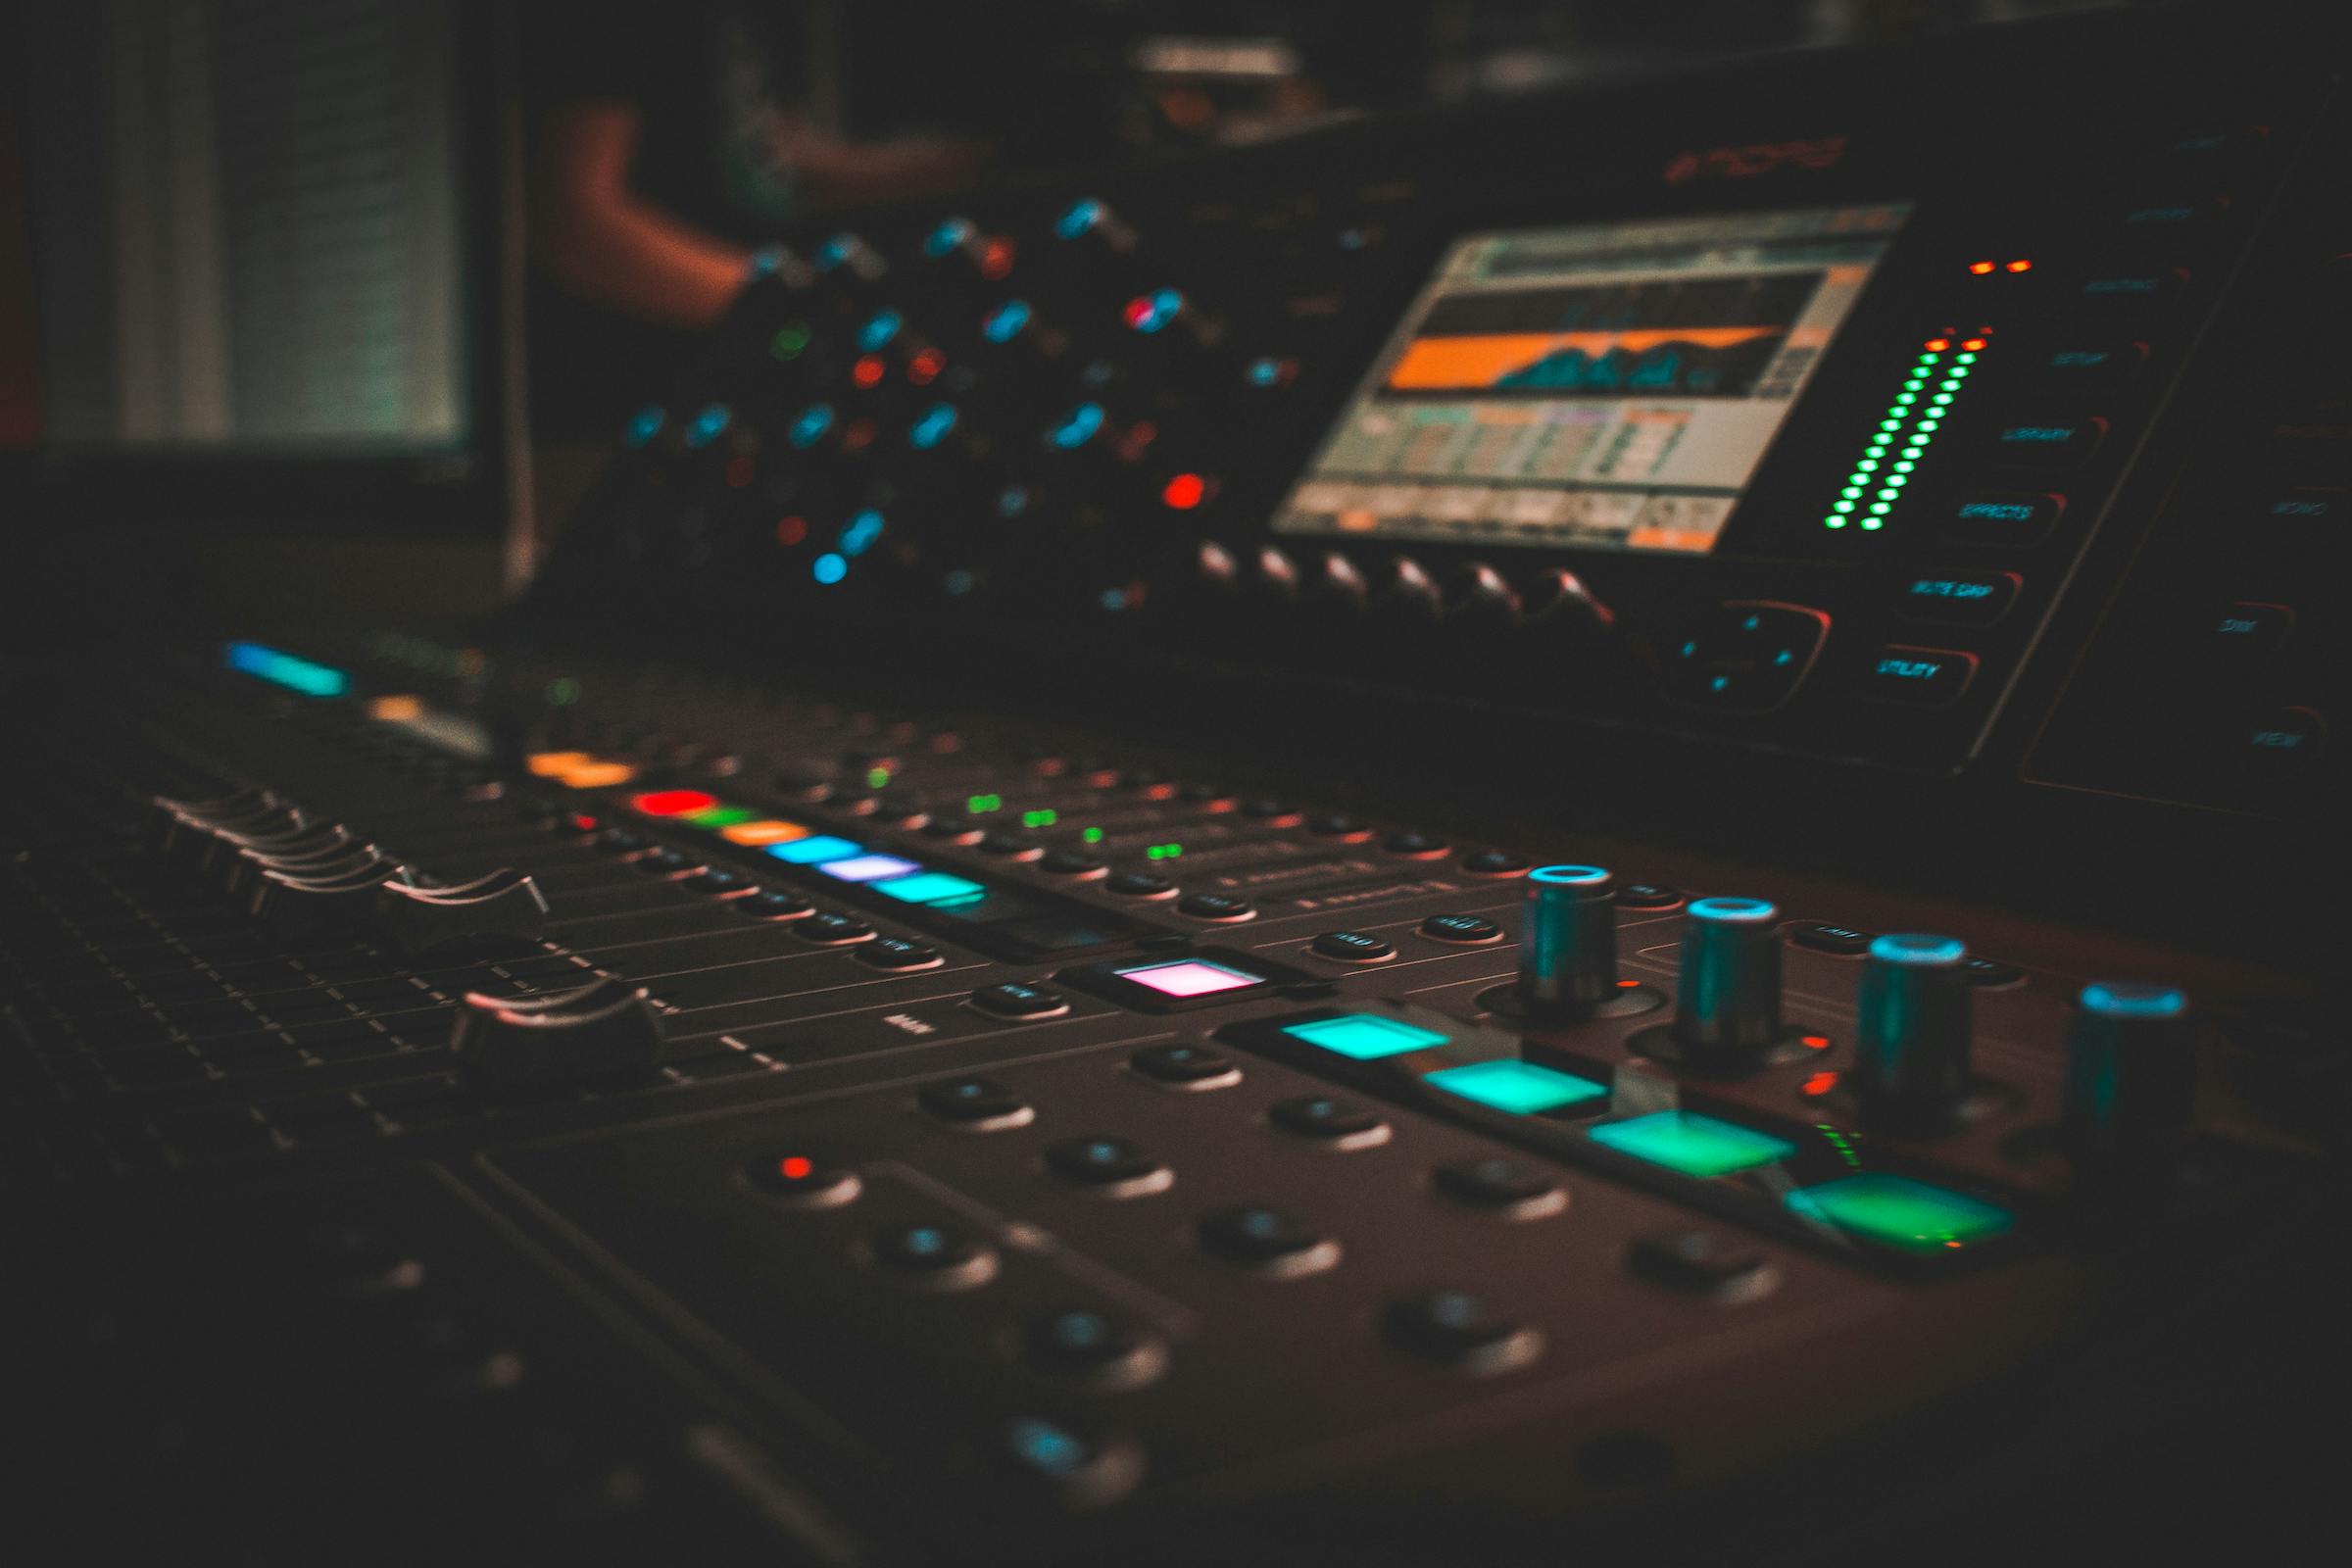 A close-up image of a mixing board with colorful lights